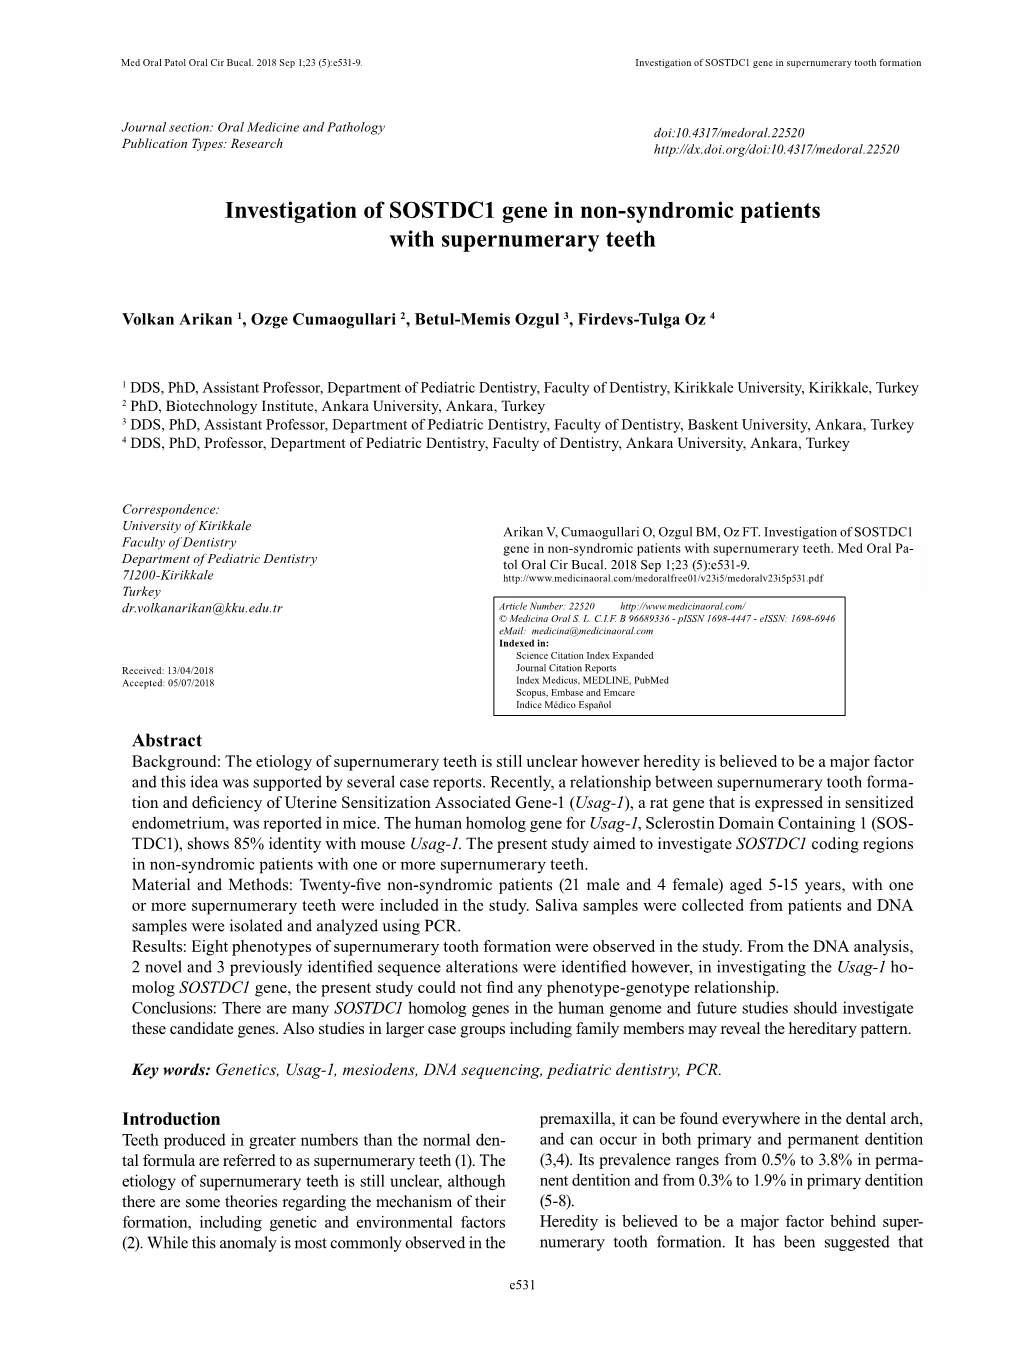 Investigation of SOSTDC1 Gene in Non-Syndromic Patients with Supernumerary Teeth